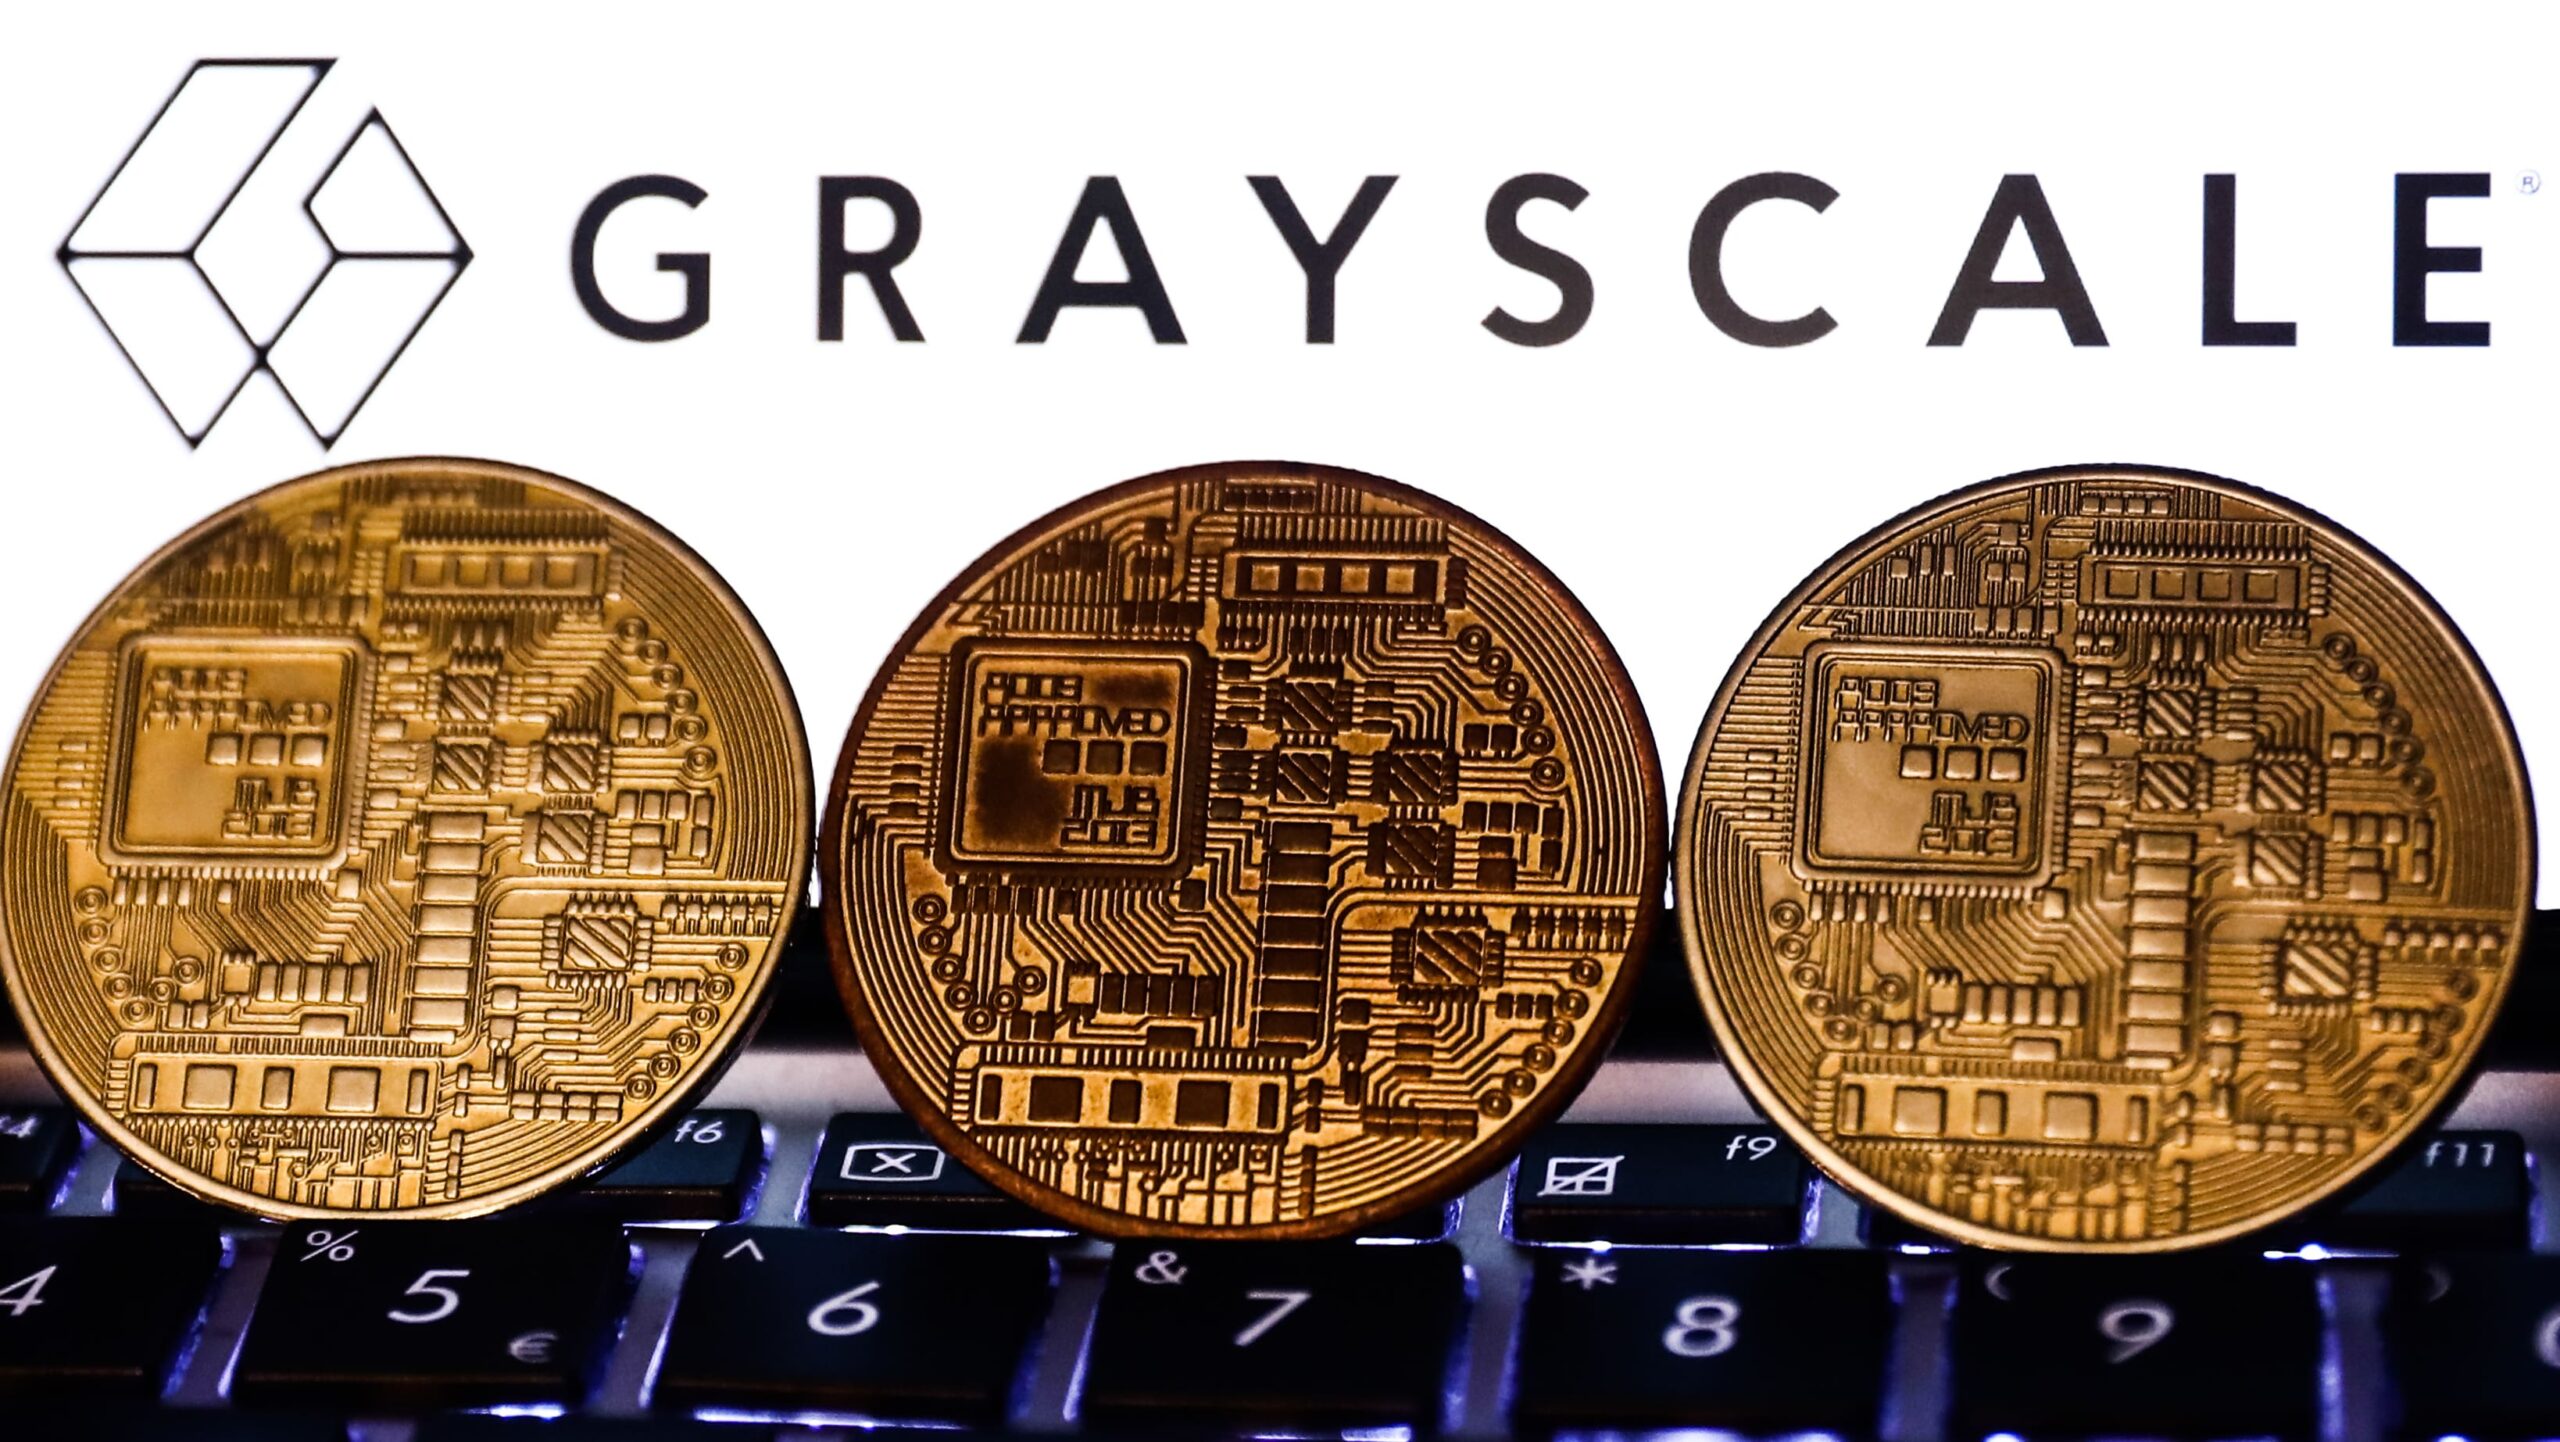 Grayscale’s BTC Holdings: Second-Largest Player With $16 Billion